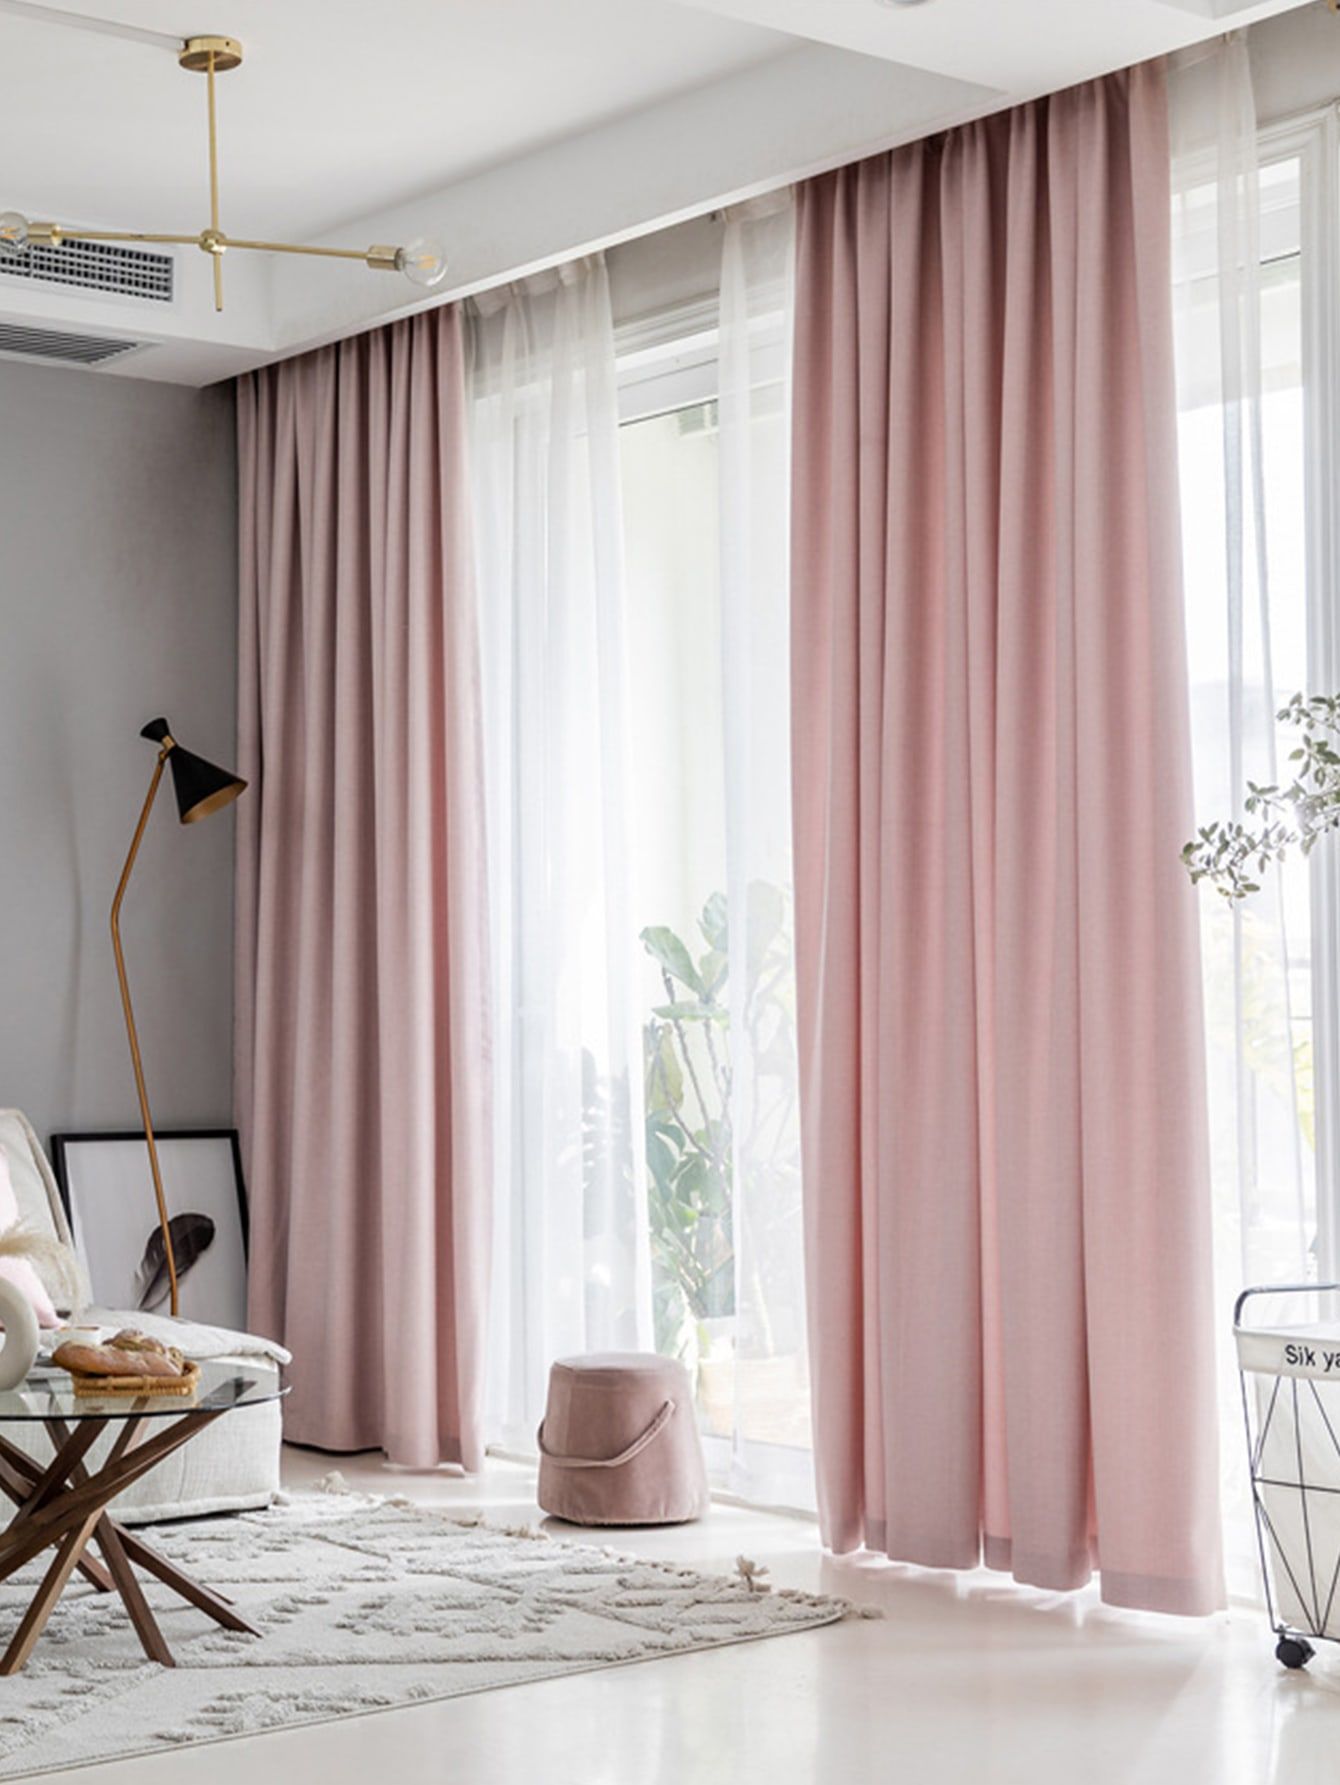 Choosing the Perfect Pink Curtains for
Your Home